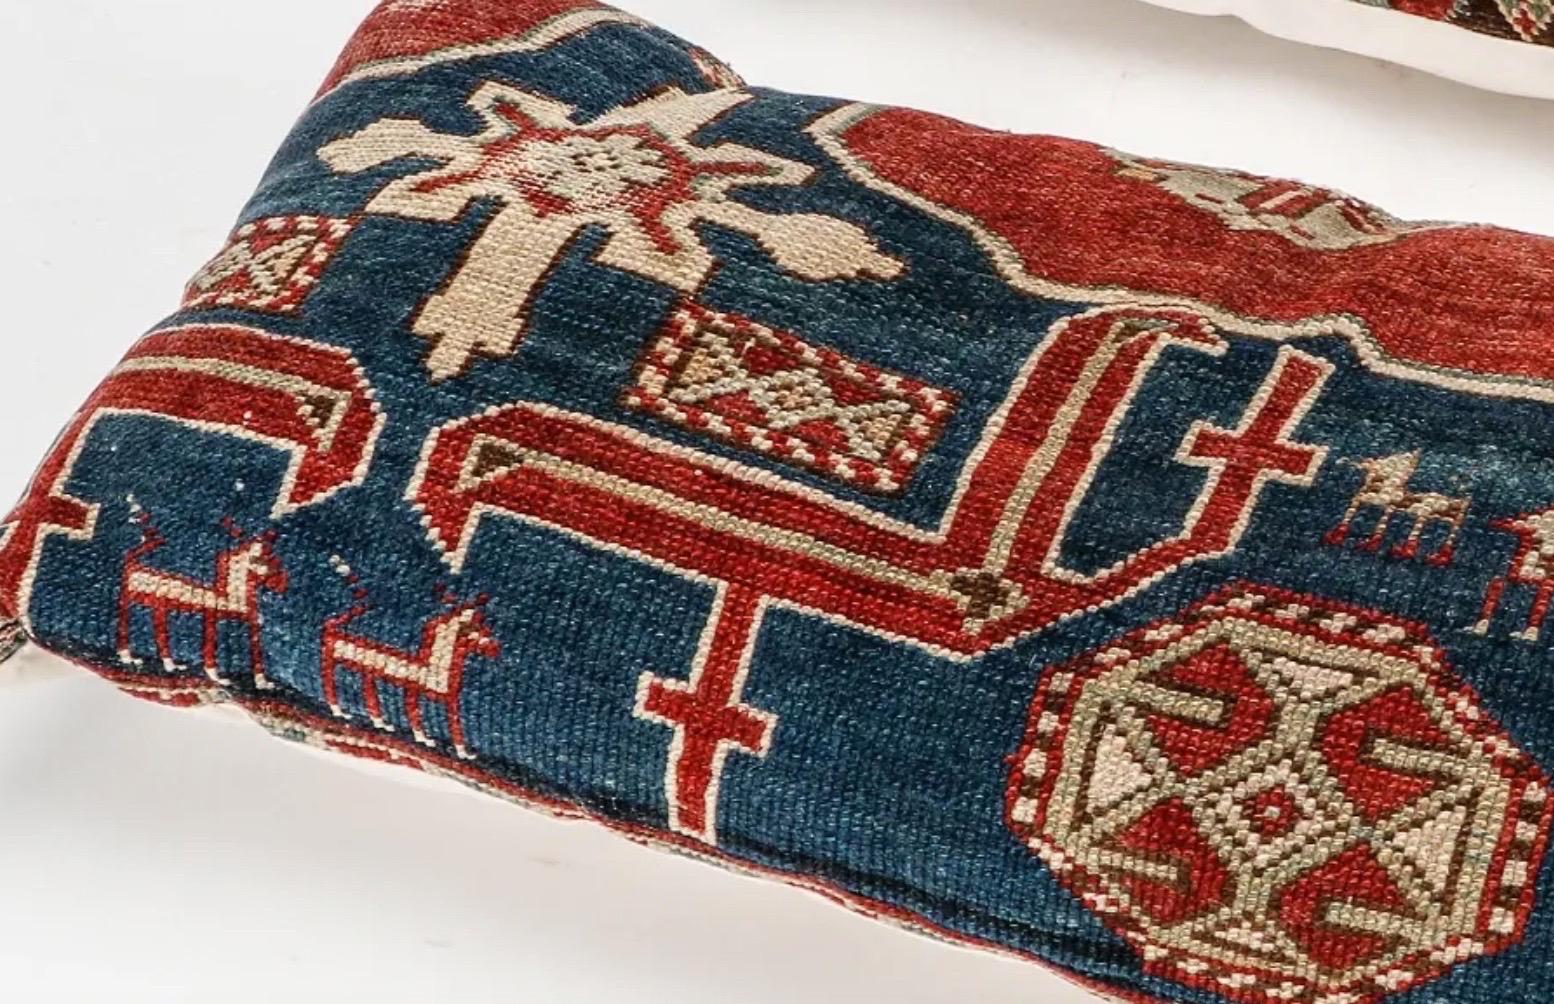 Lovely Antique Persian Tribal Lumbar Rug Pillow

Larger one measures: 17 x 7 x 5 inches 

